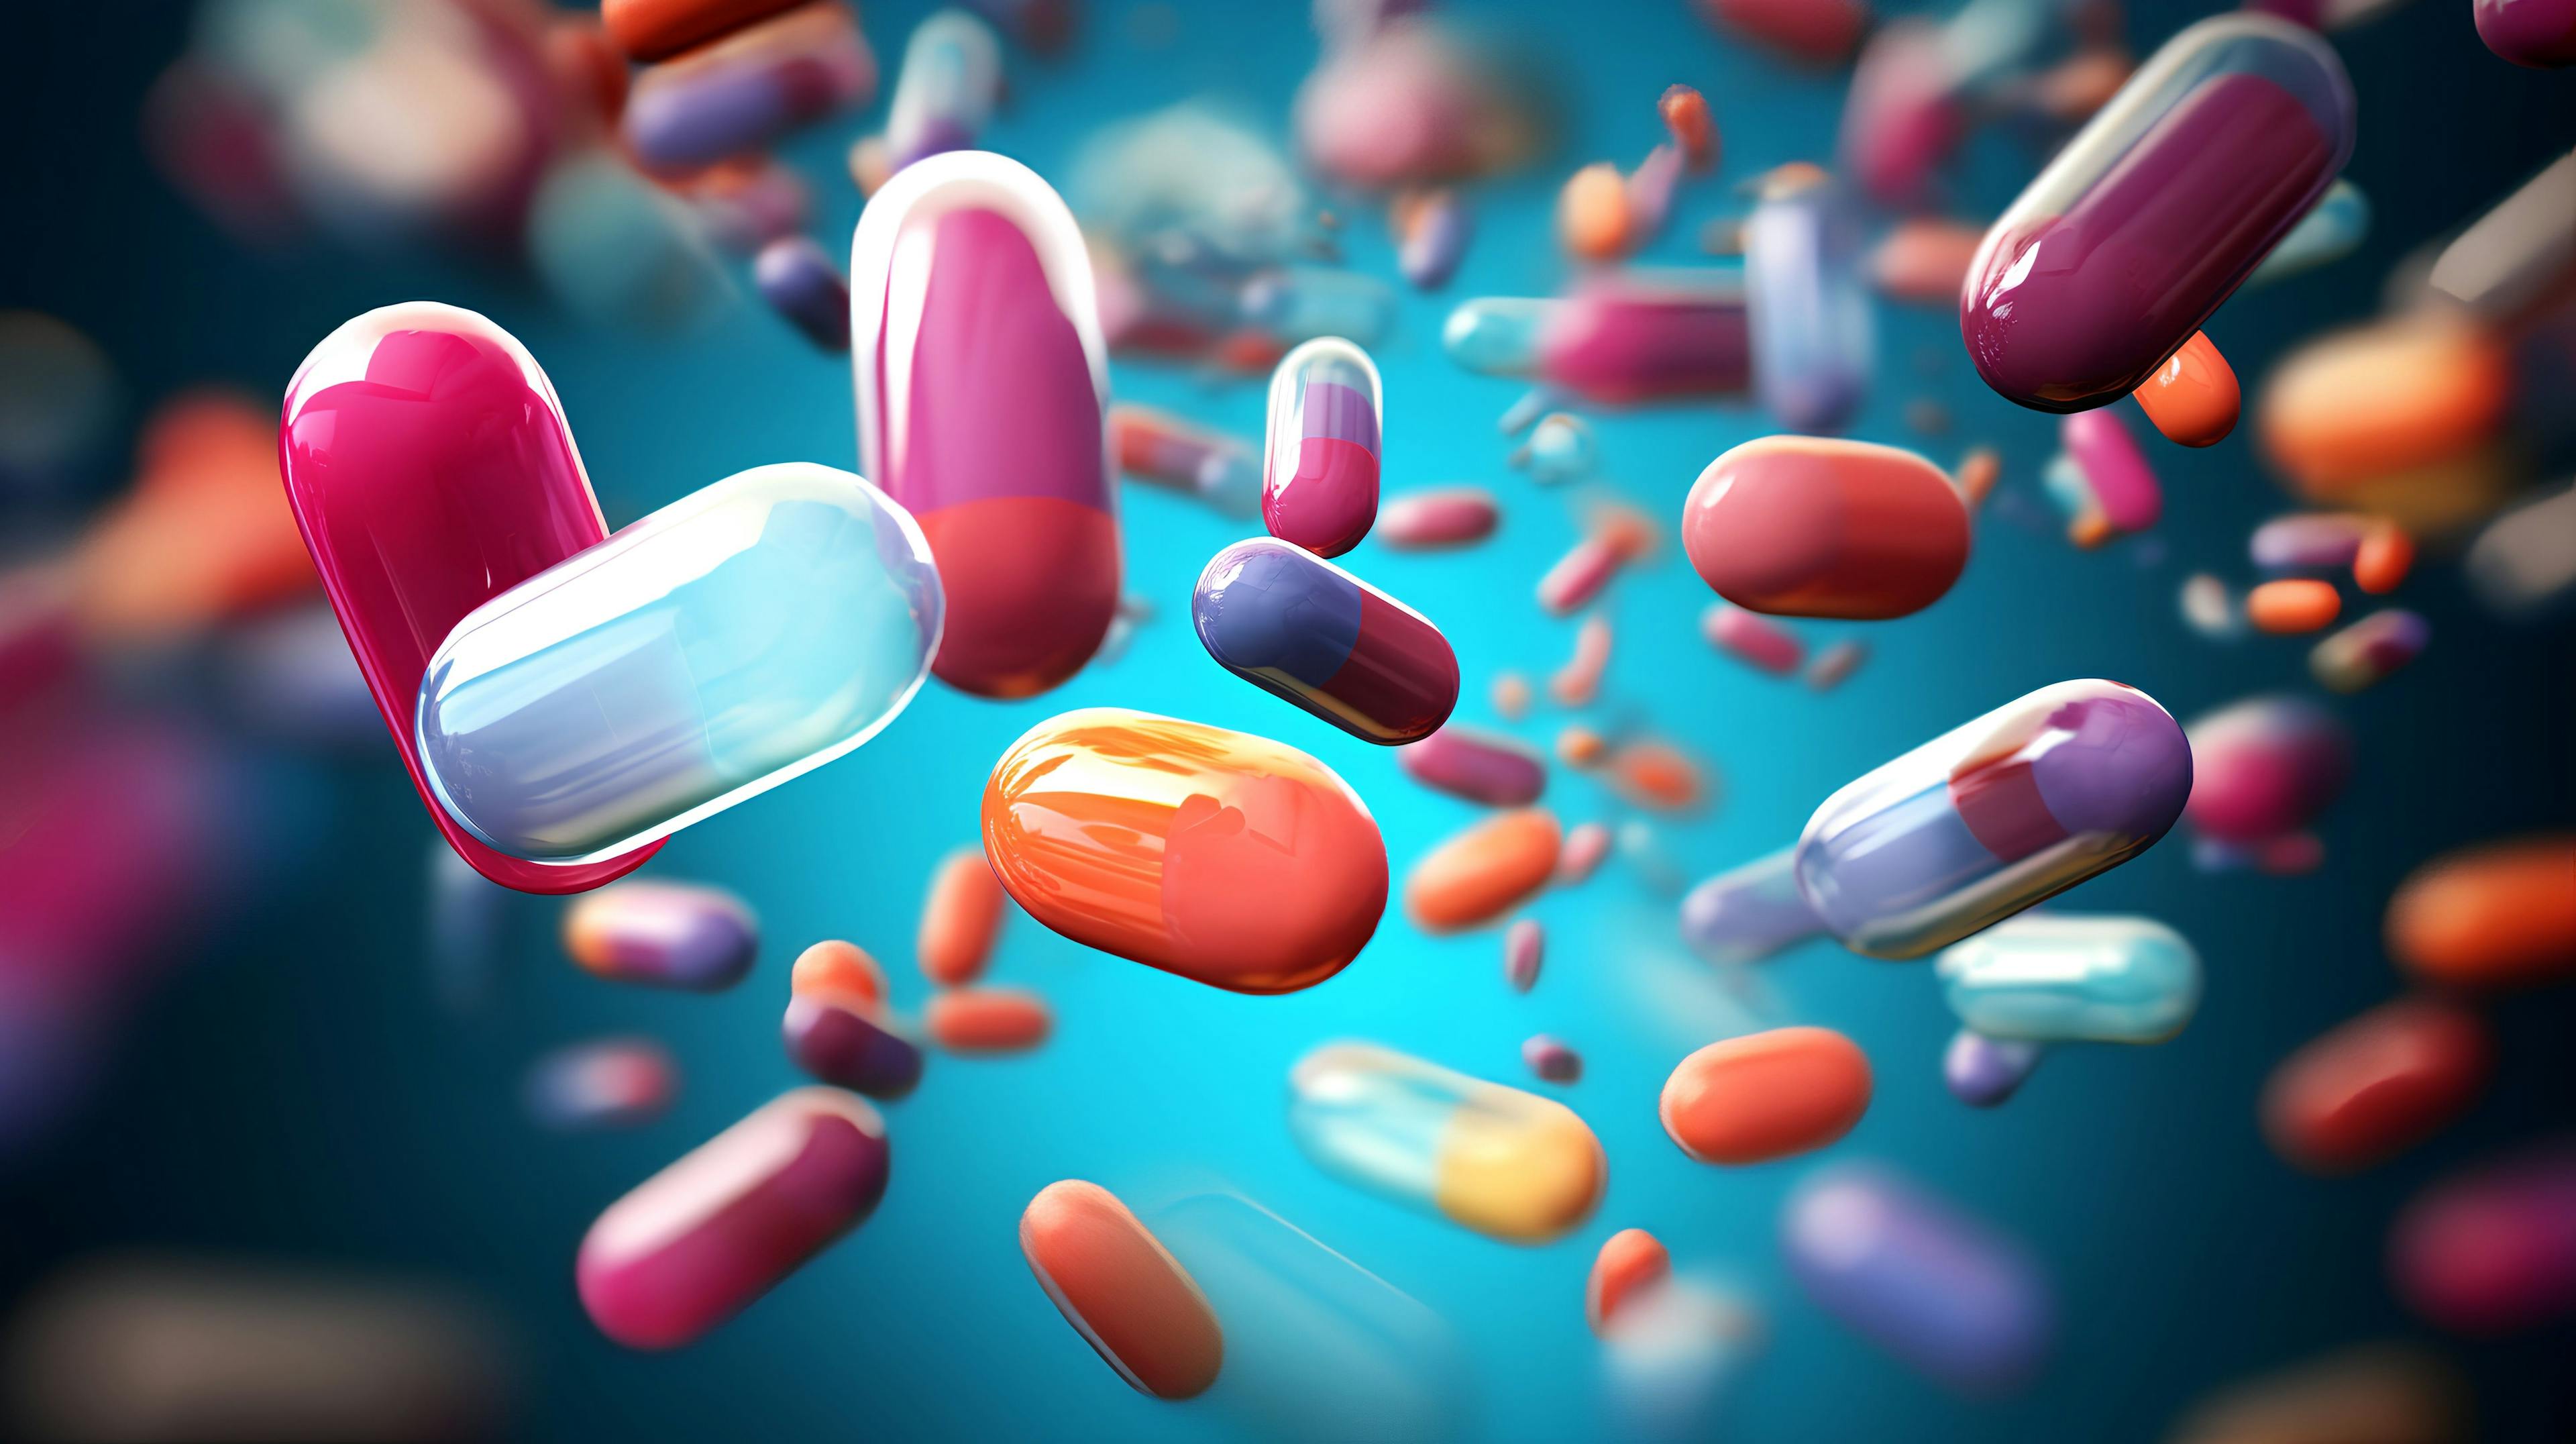 For the policy and procedures element of compliance, Harker explained that it is essential to create policies at the pharmacy that establish roles and responsibilities that reflect DEA regulations and align with national policies. Image Credit: © TensorSpark - stock.adobe.com